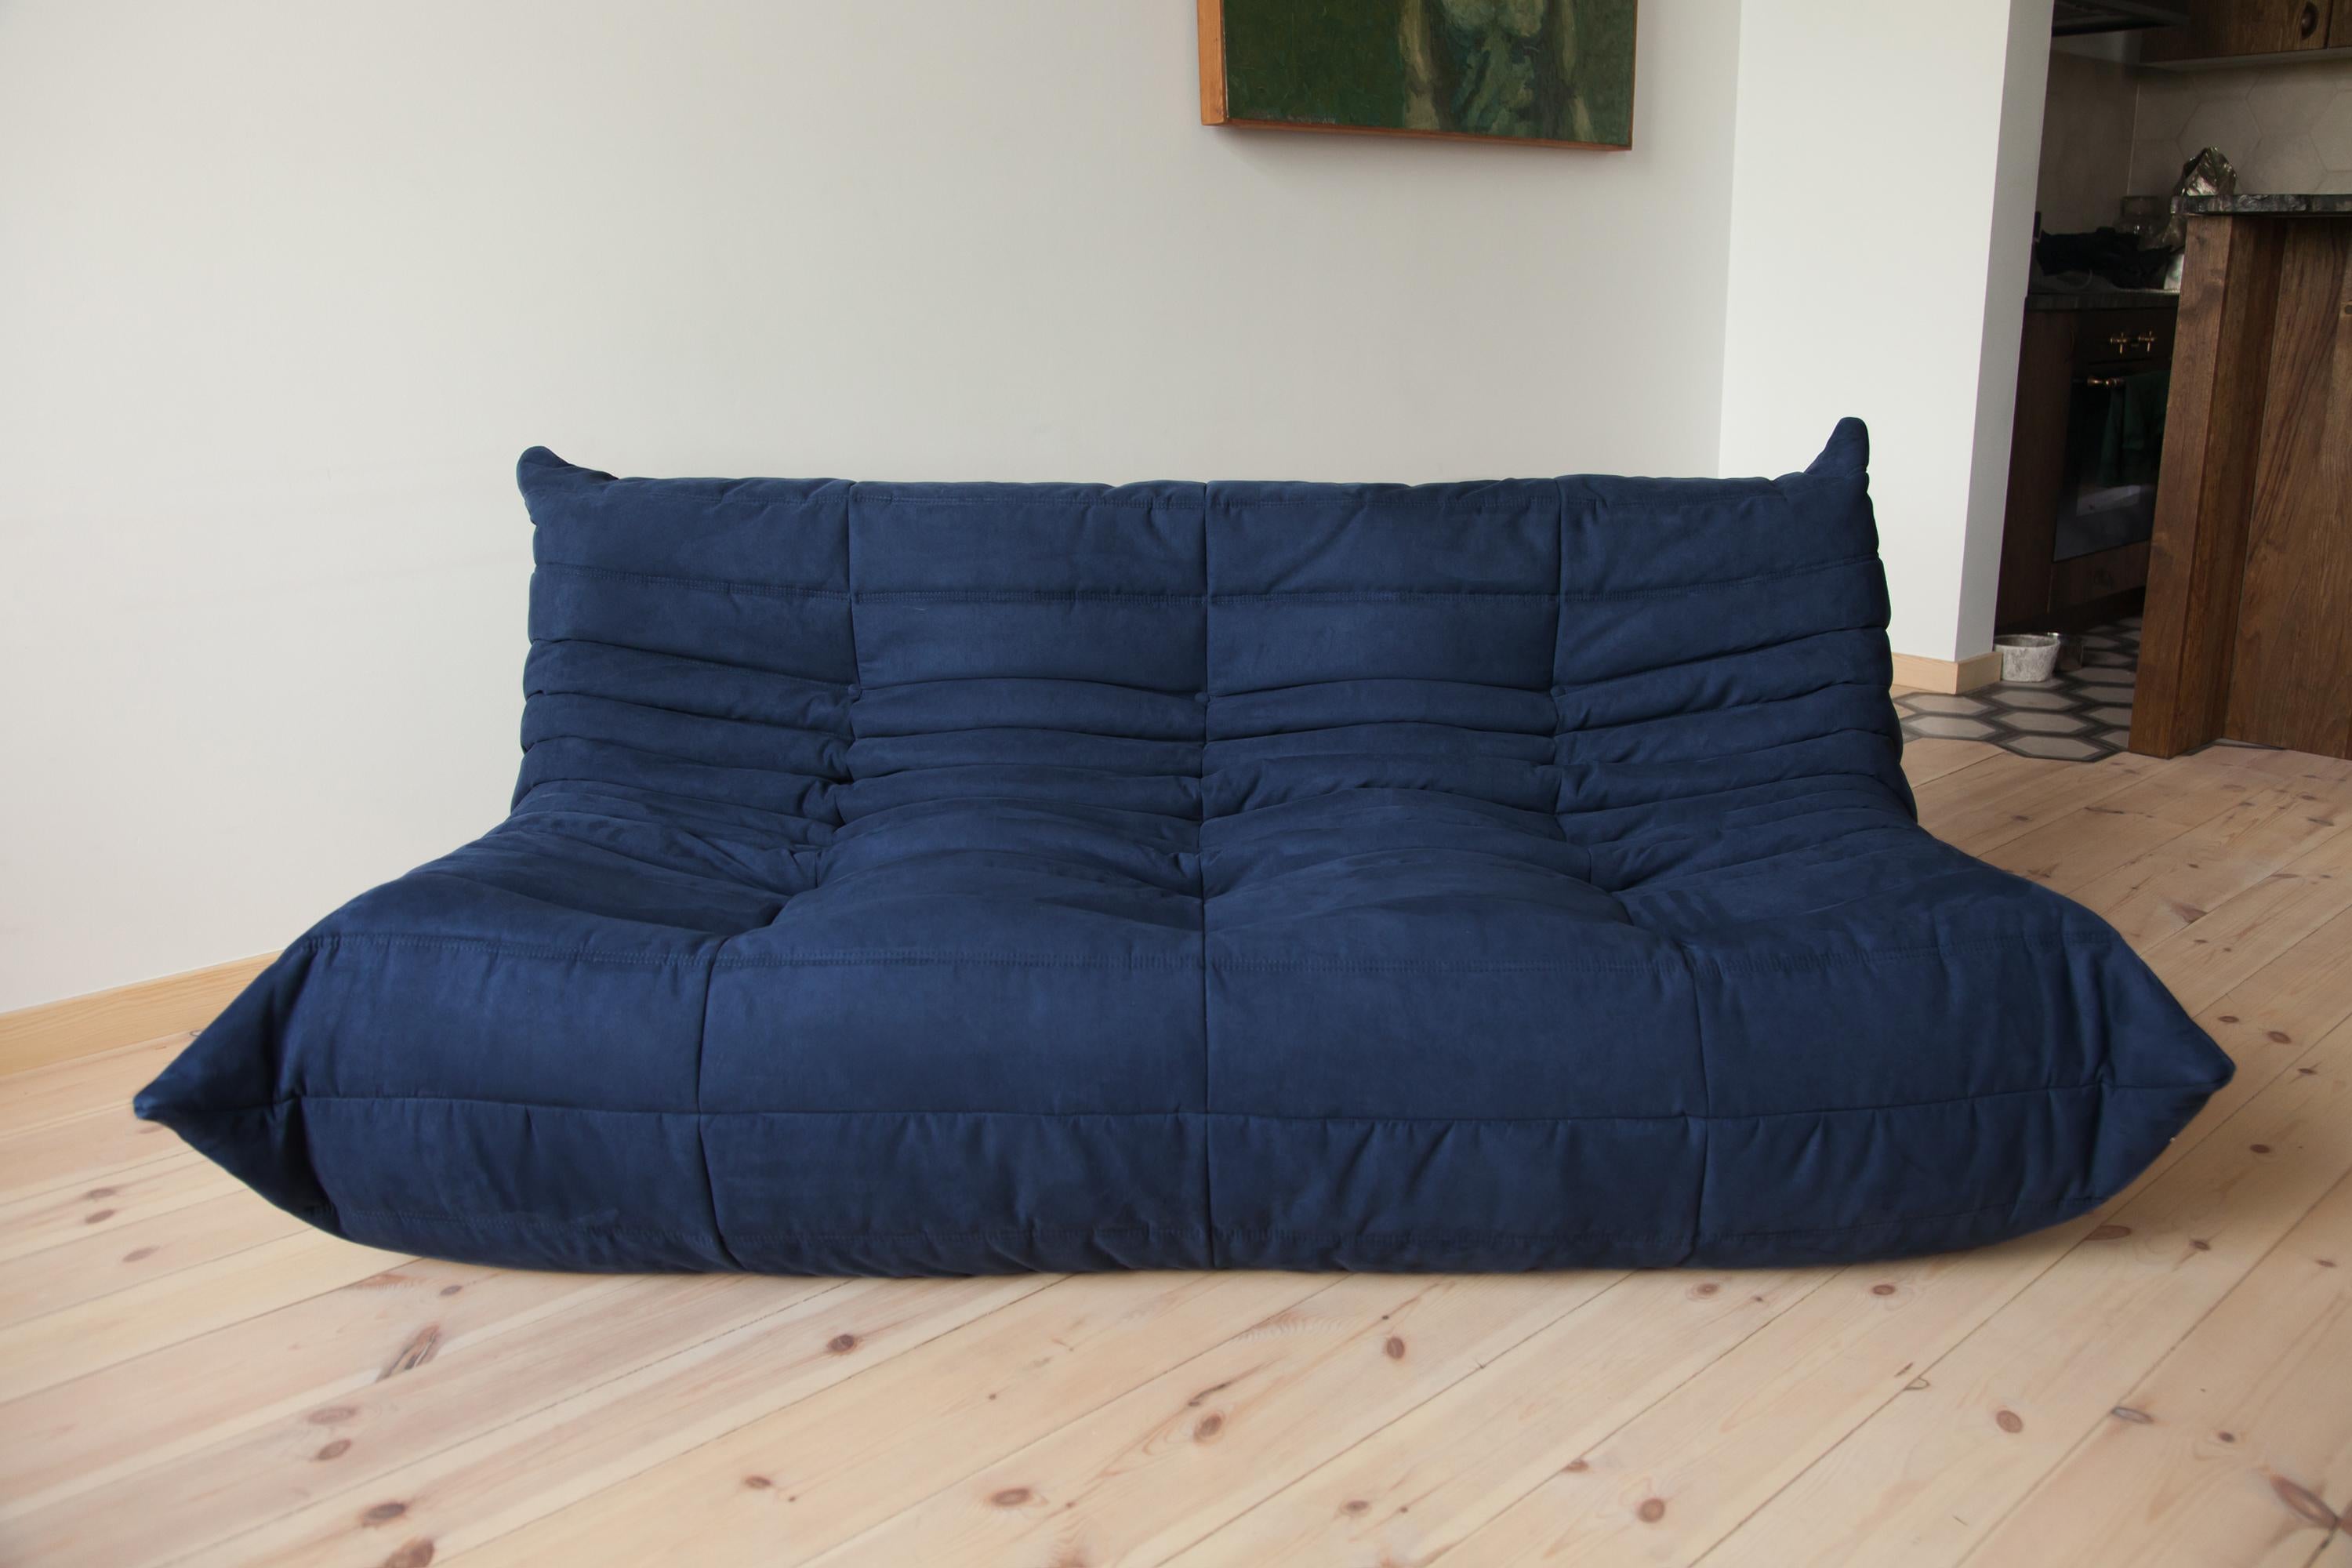 This Togo three-seat sofa was designed by Michel Ducaroy in 1973 and was manufactured by Ligne Roset in France. It has been reupholstered in new dark blue microfibre (70 x 174 x 102 cm). It has the original Ligne Roset logo and genuine Ligne Roset